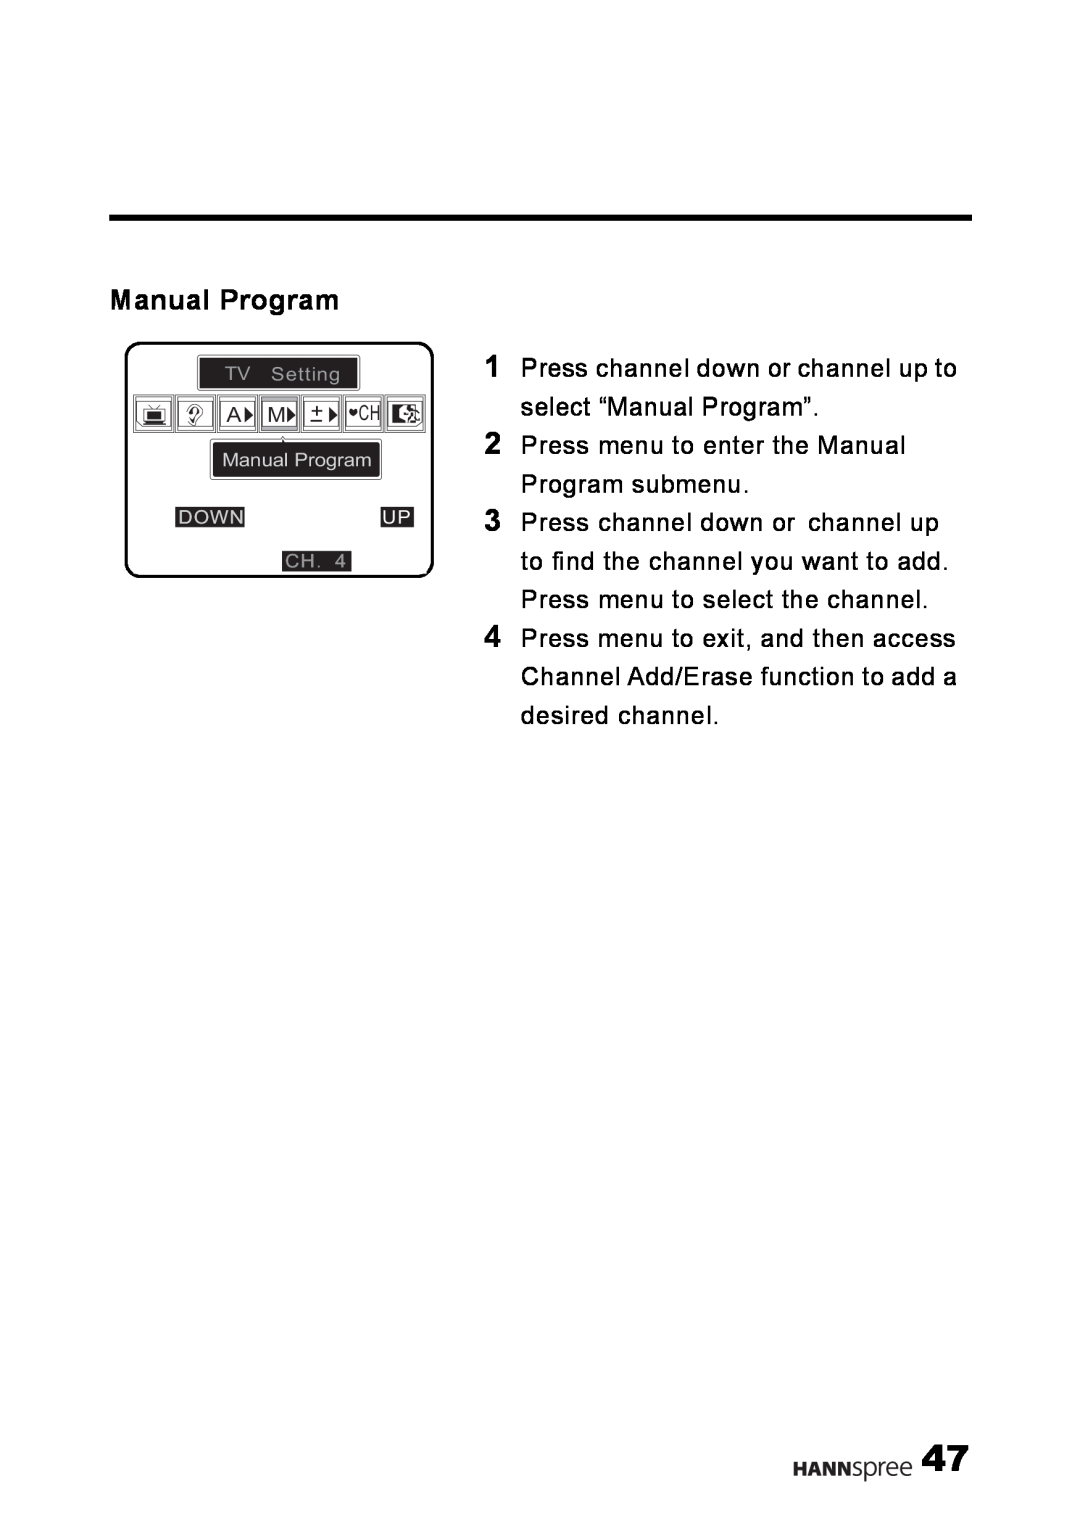 HANNspree LT02-12U1-000 user manual Press channel down or channel up to select “Manual Program”, TV Setting, Downup 